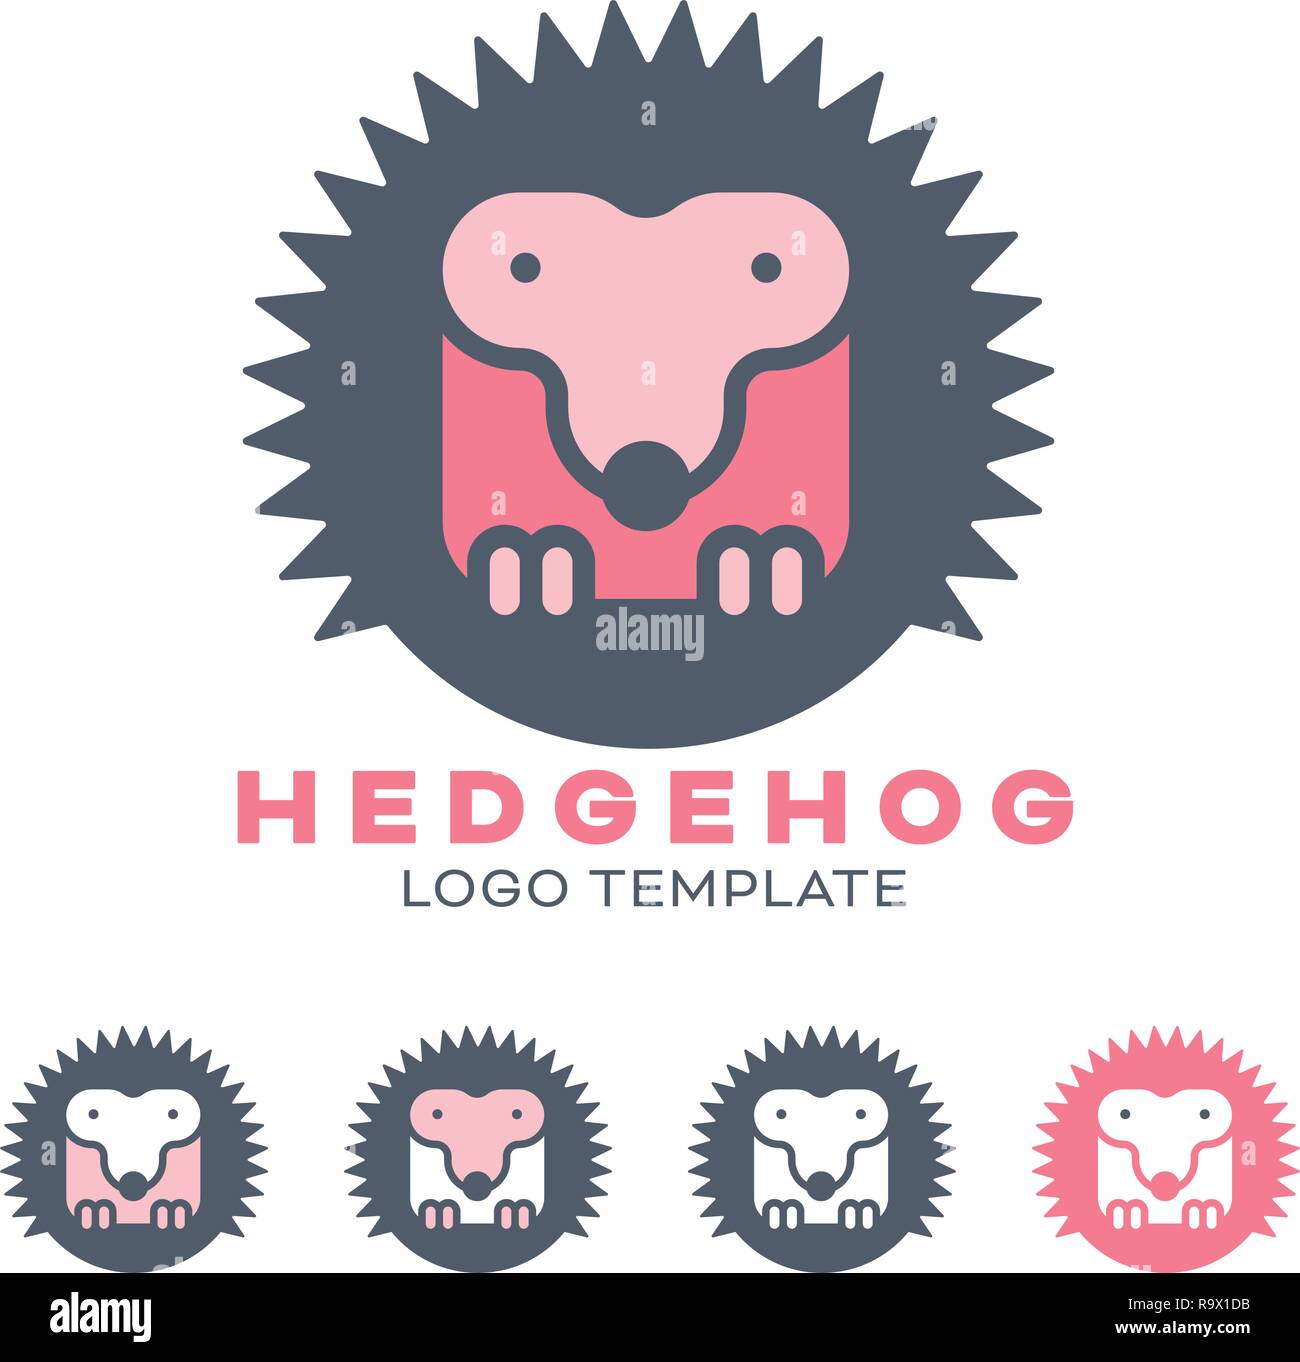 Hedgehog logo vector template. Security, defense and protection symbol. Business design element. Stock Vector